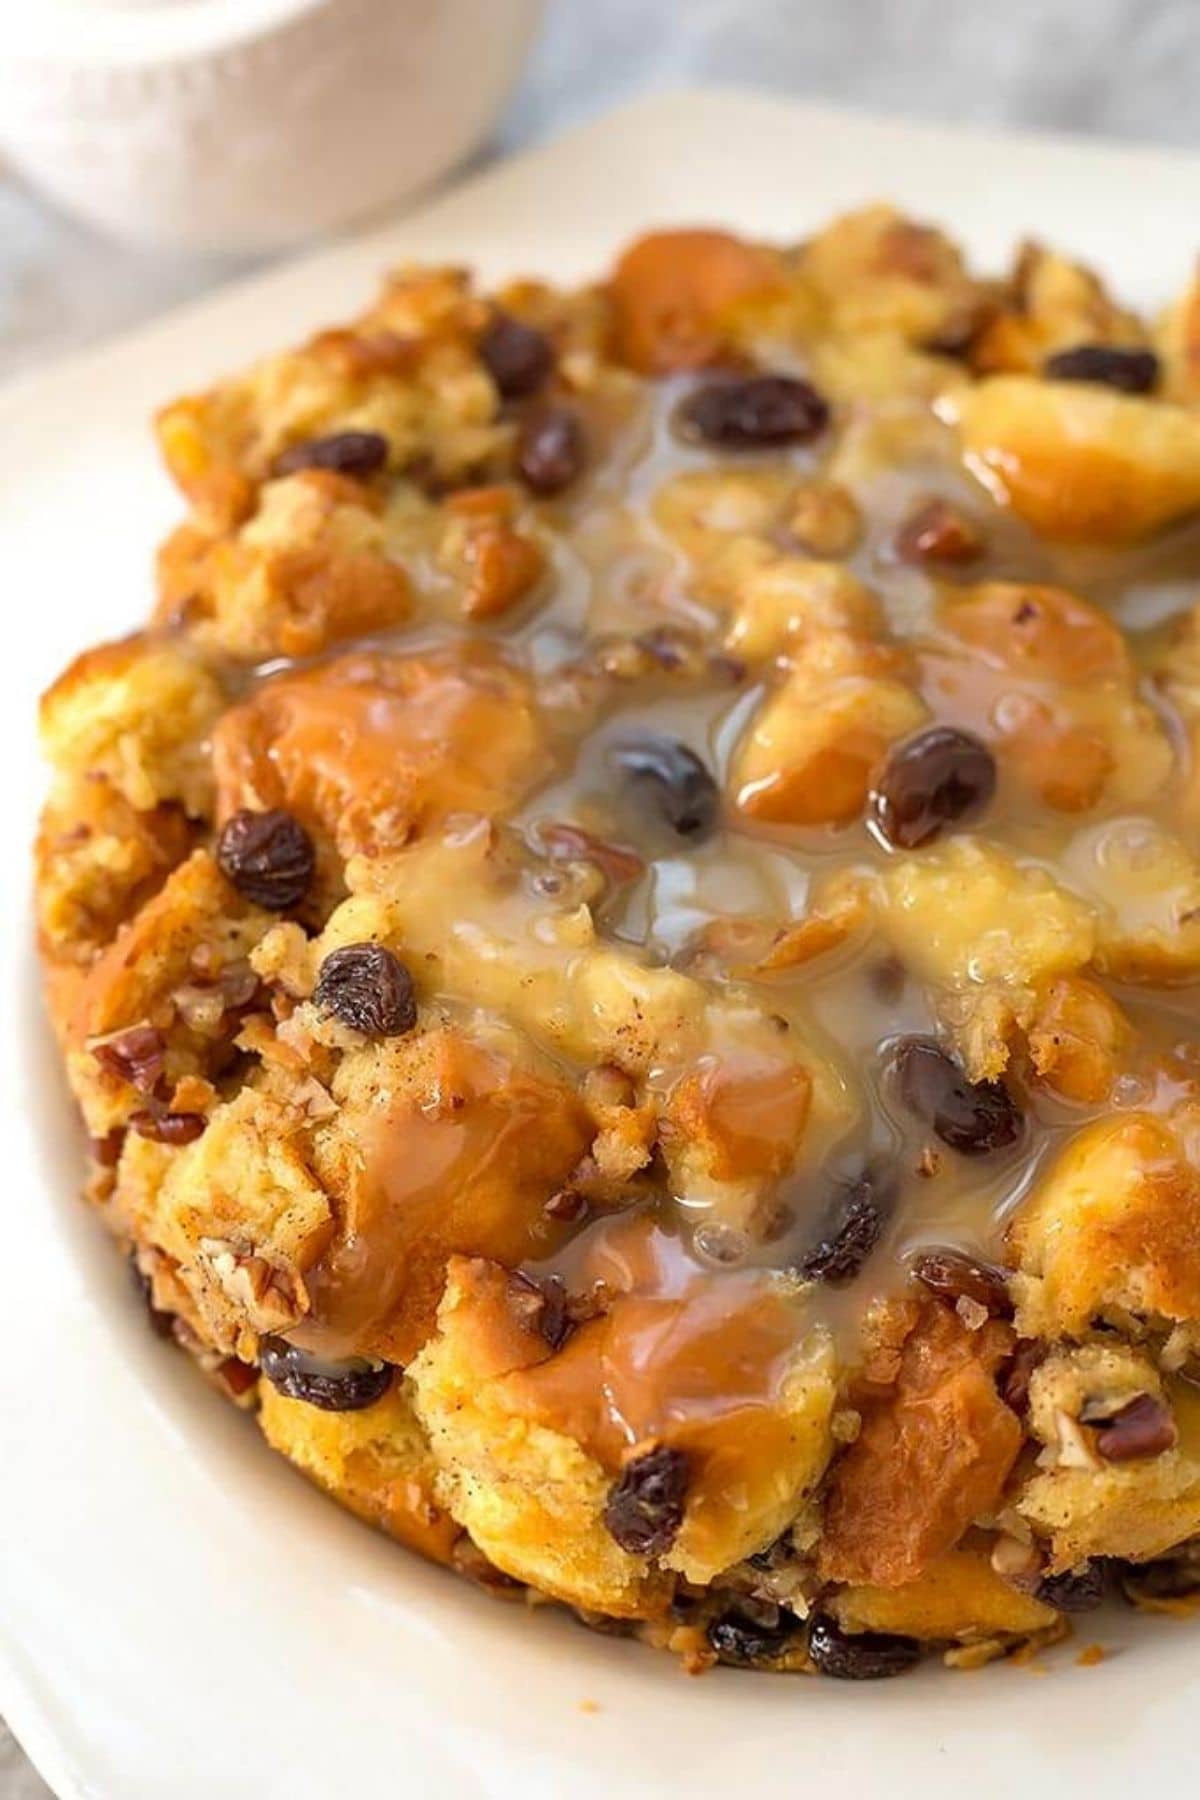 Bread pudding with raisins on white platter